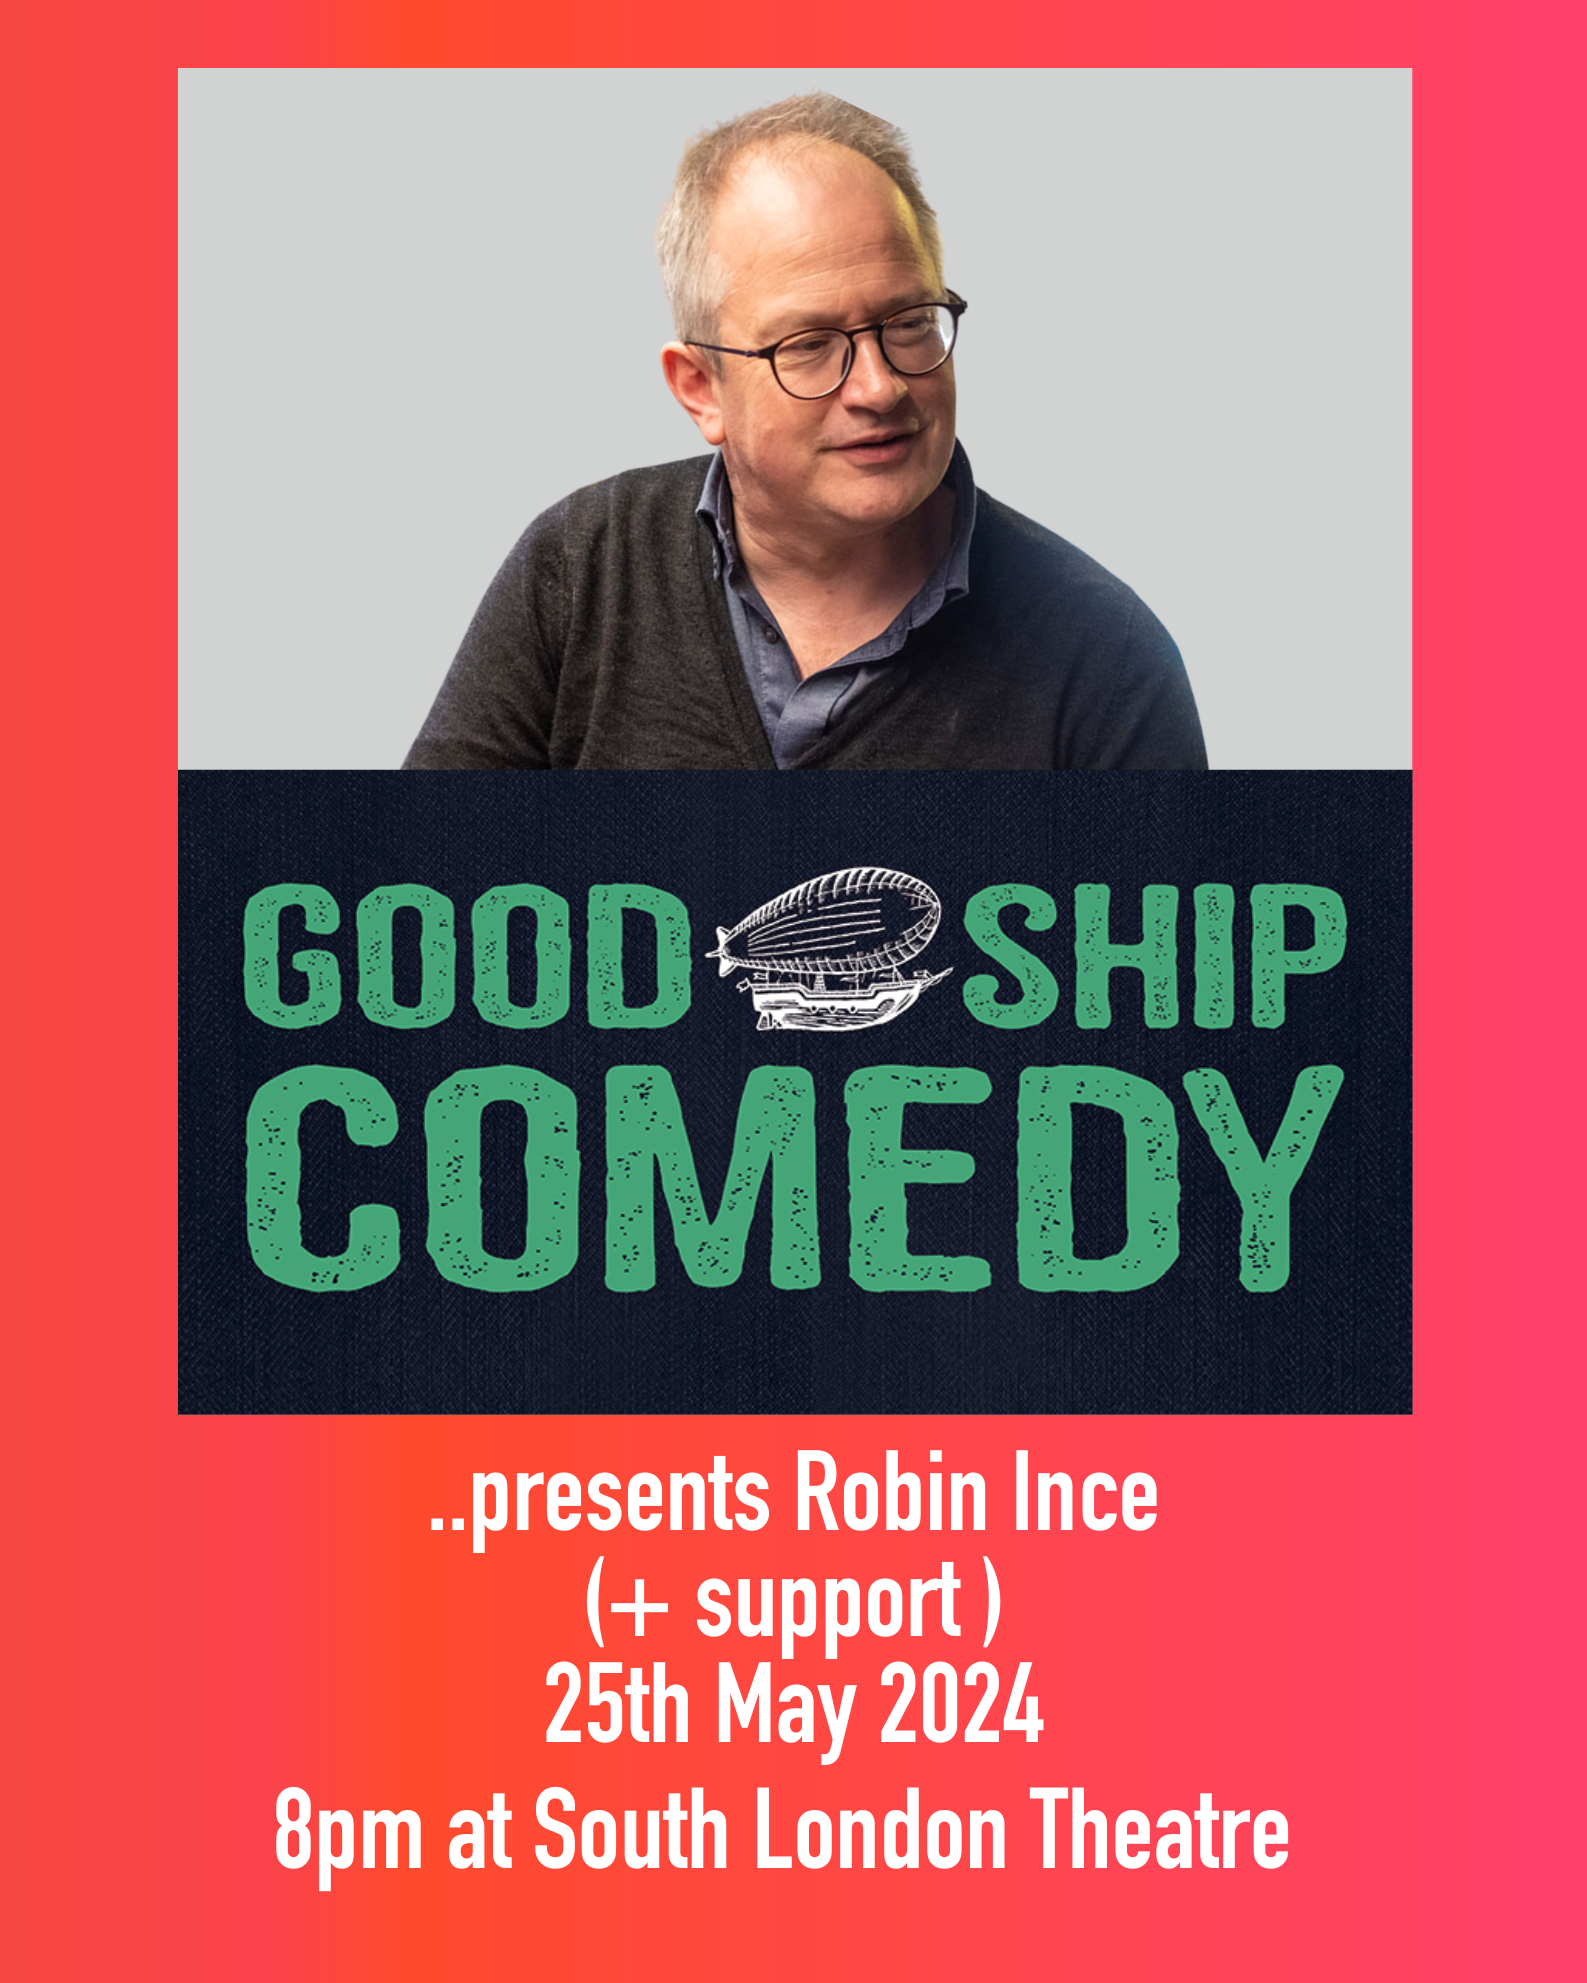 Image of Robin Ince with Good Ship Comedy logo.